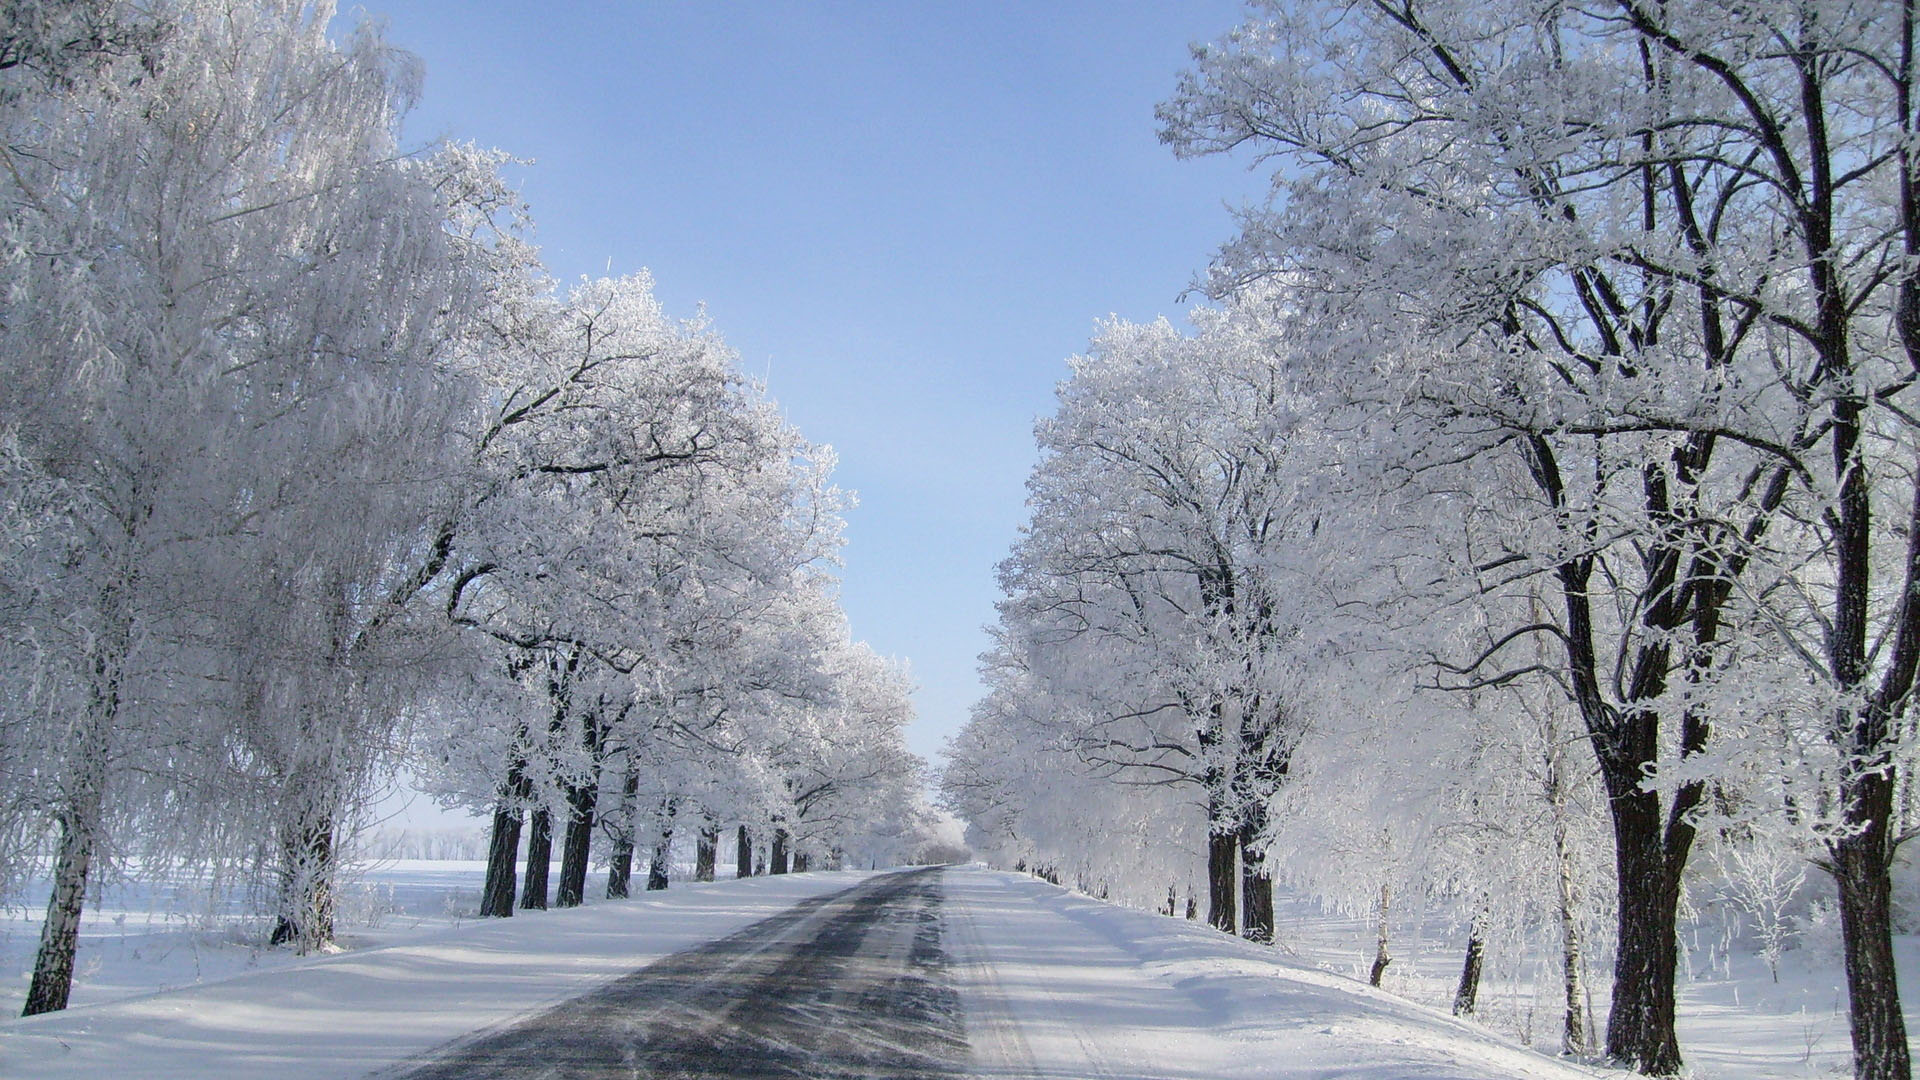 Desktop wallpaper with beautiful road scenery after snowing